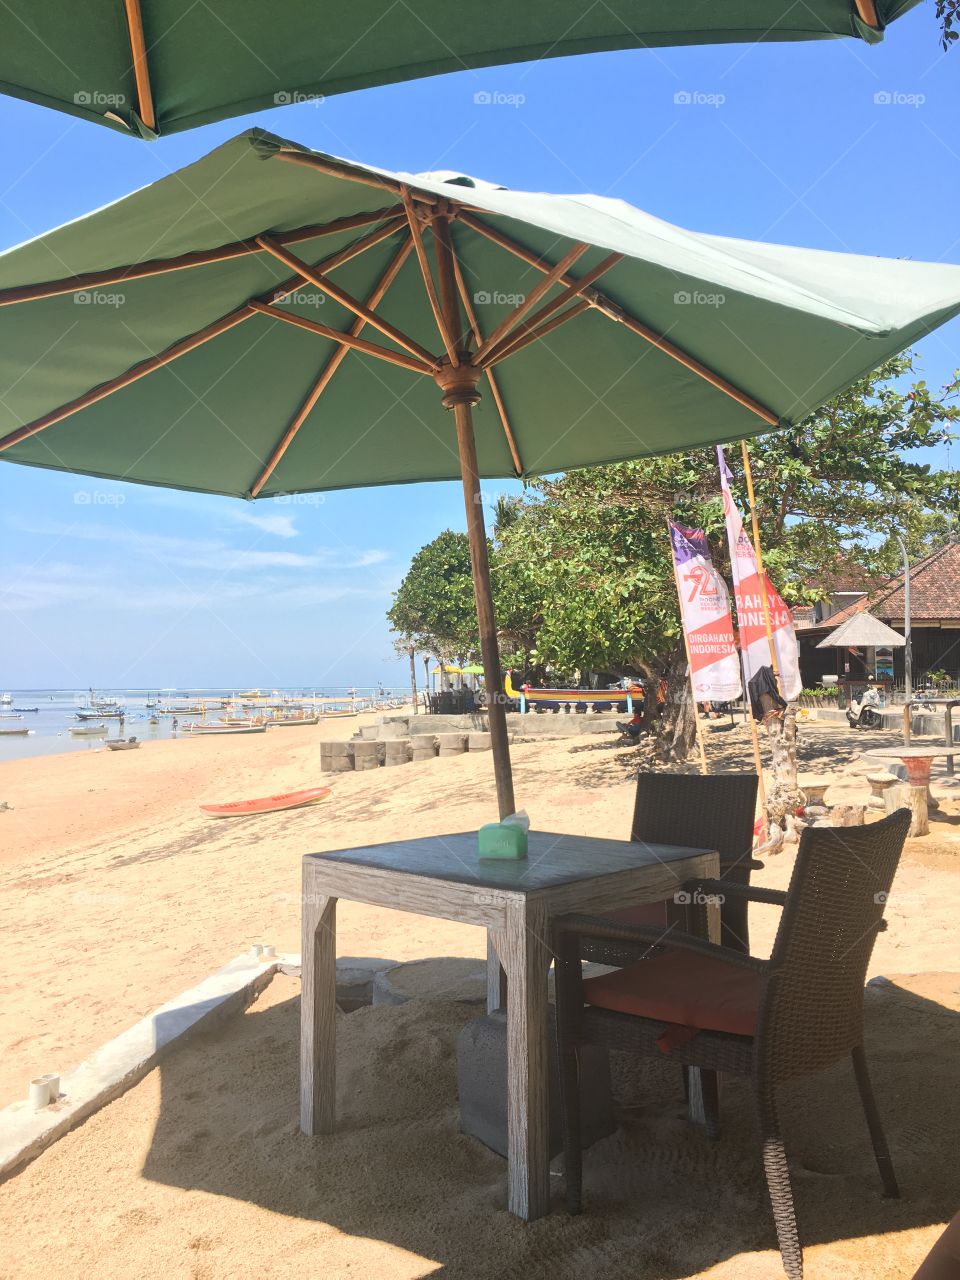 Lunch by the beach in Bali